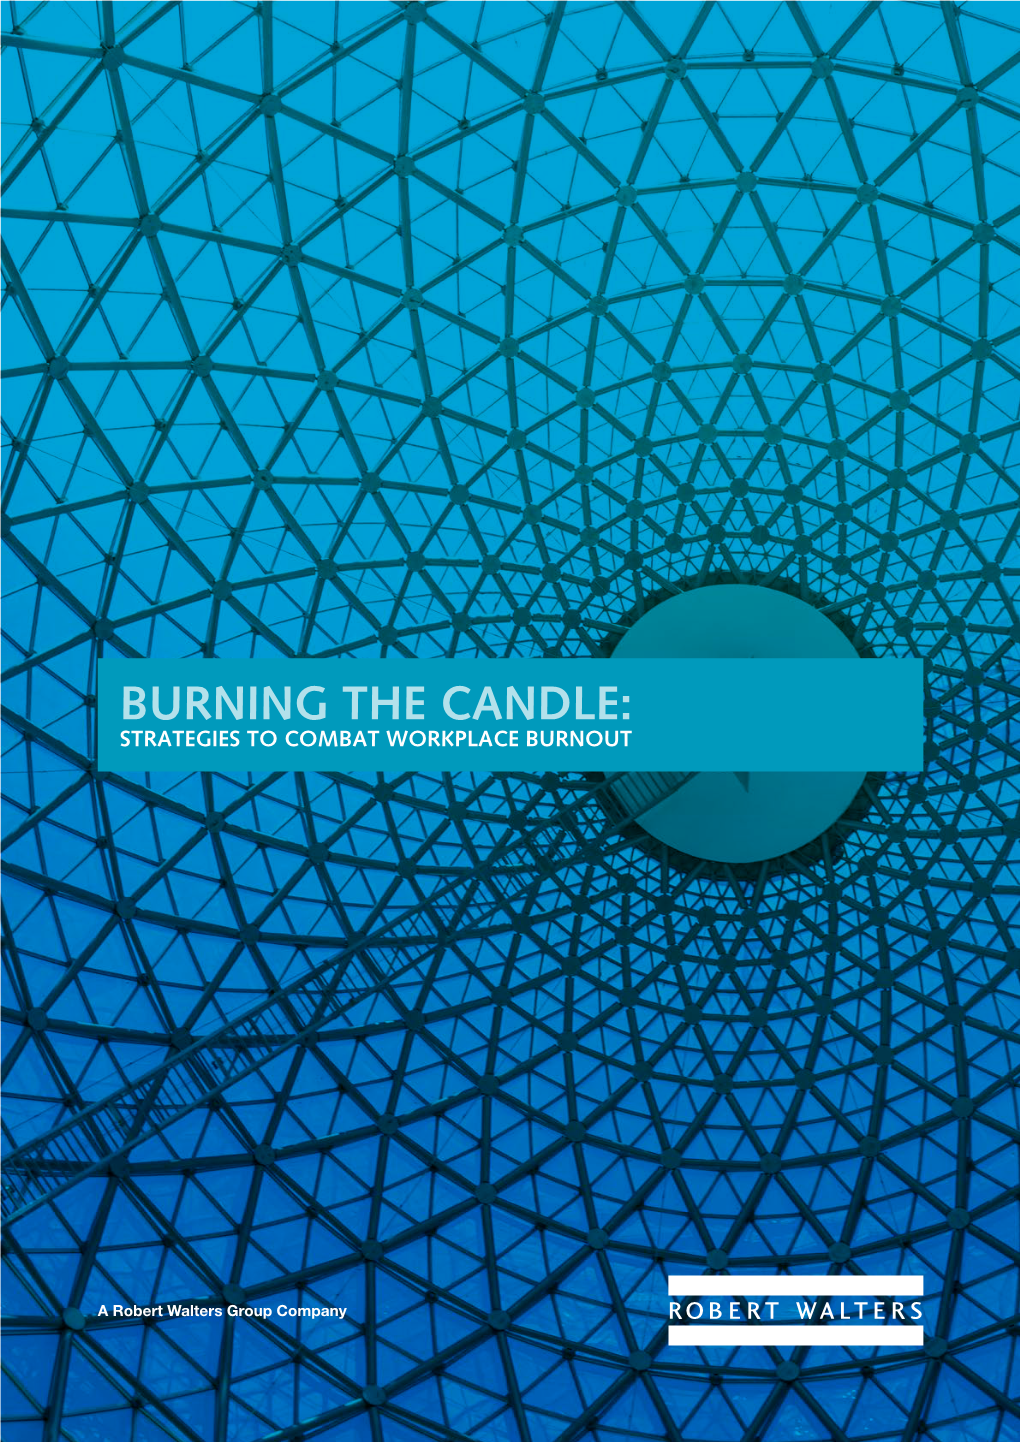 Burning the Candle: Strategies to Prevent Workplace Burnout